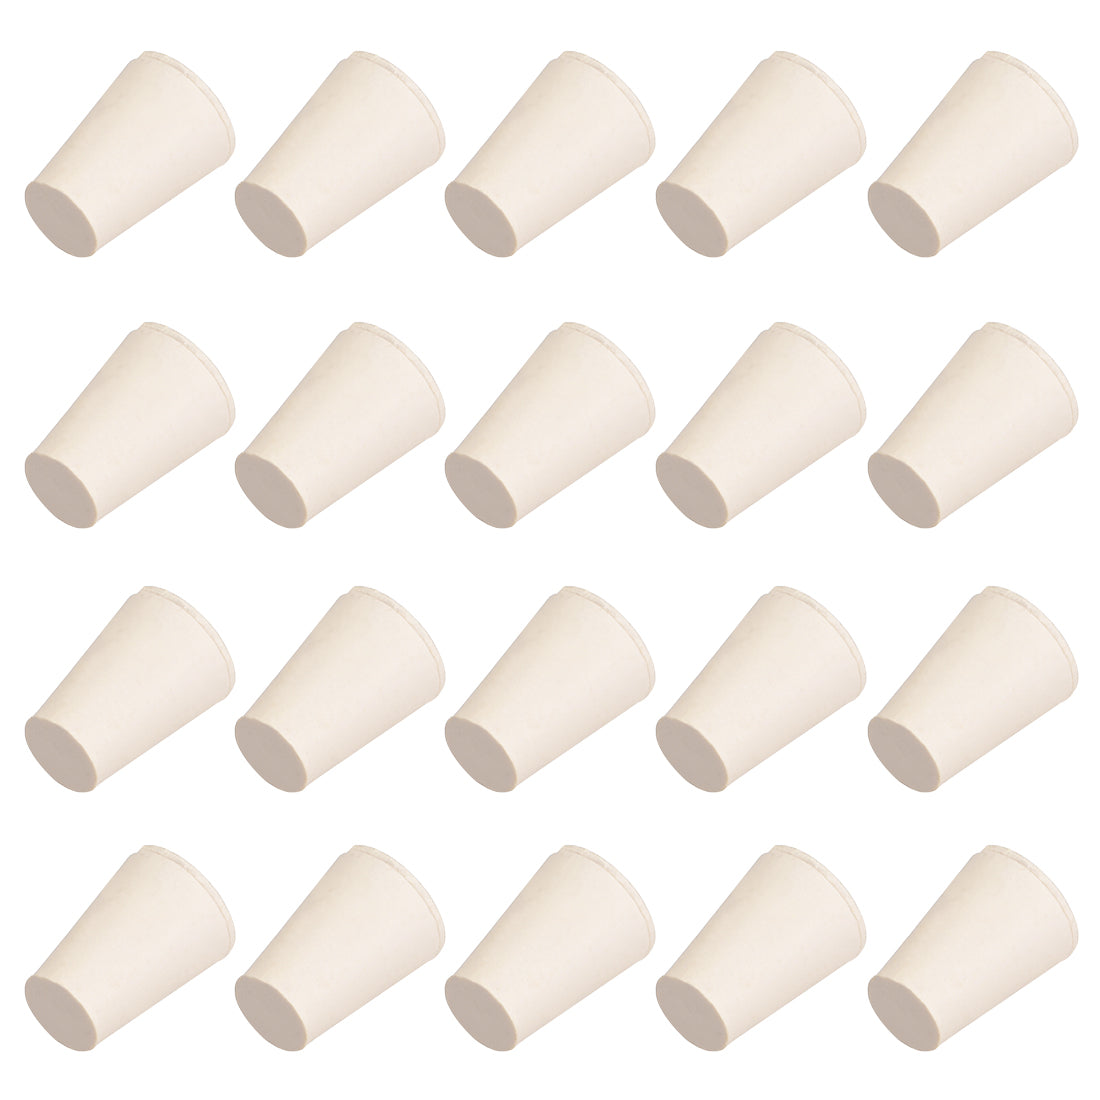 Uxcell Uxcell White Tapered Shaped Solid Rubber Stopper for Lab Tube Stopper Size 000 20Pcs